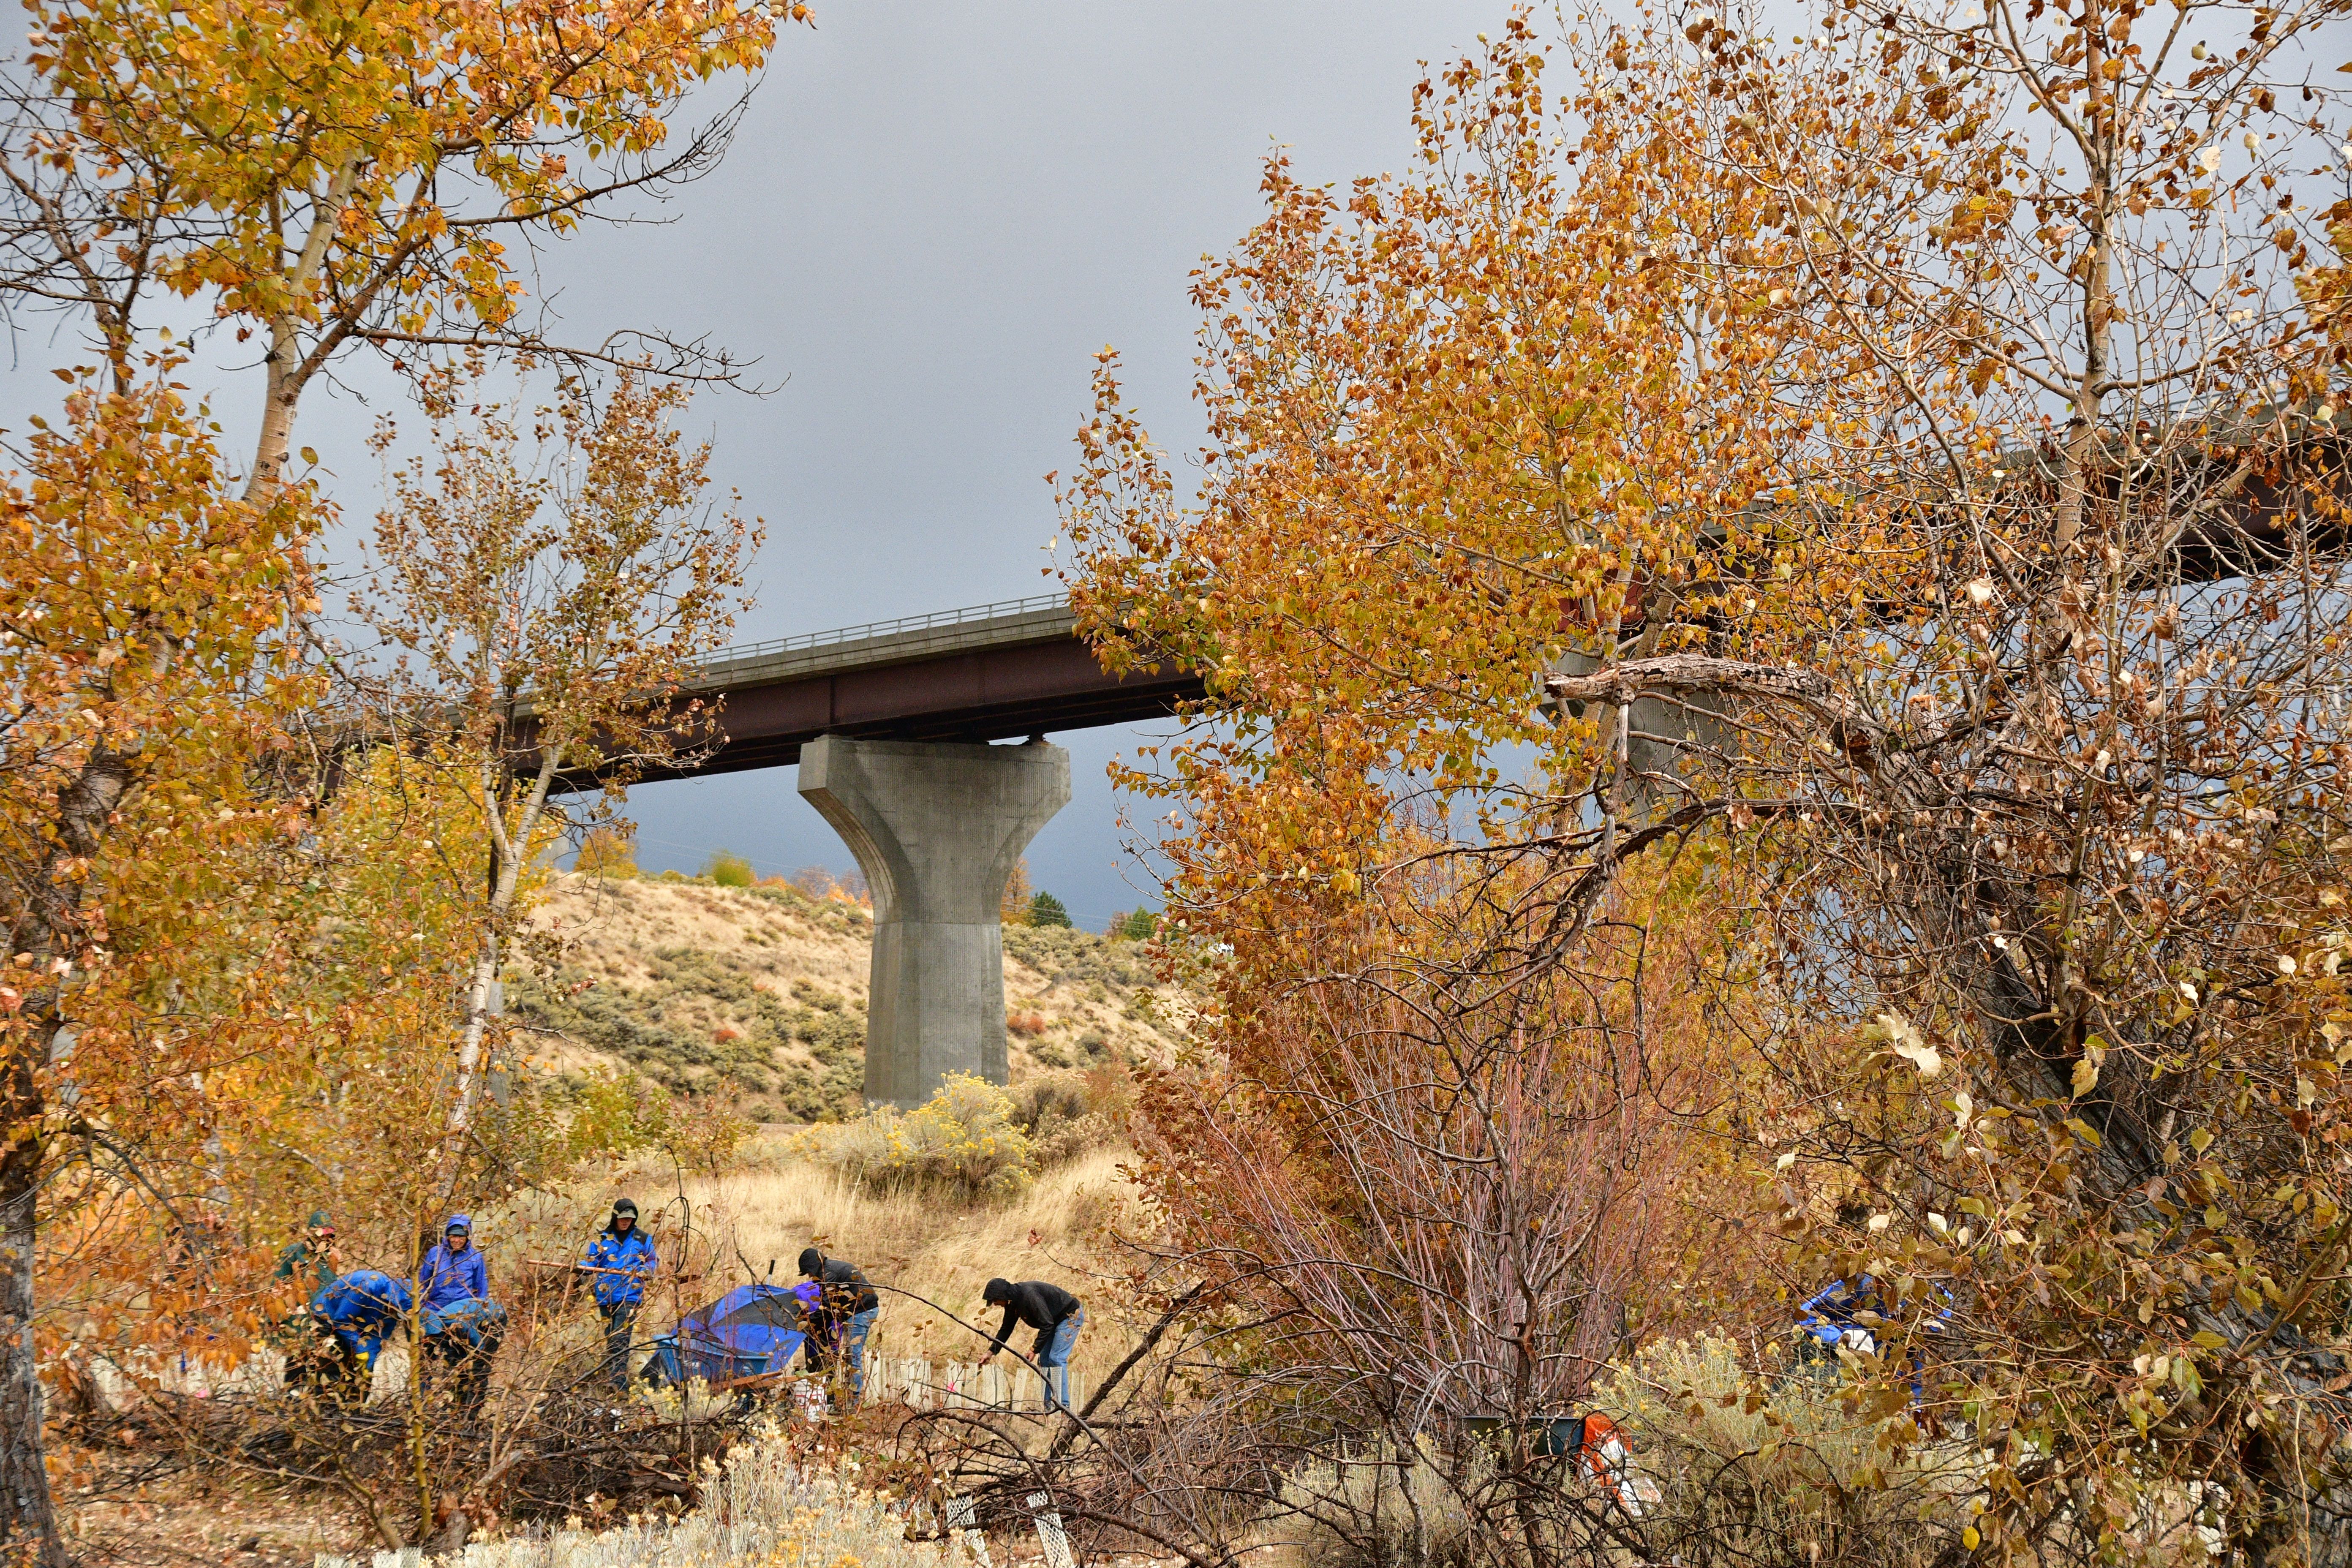 a scattered group of people stand underneath cottonwood trees with yellowing leaves. They are reaching down planting plants. The highway 21 bridge is in the background